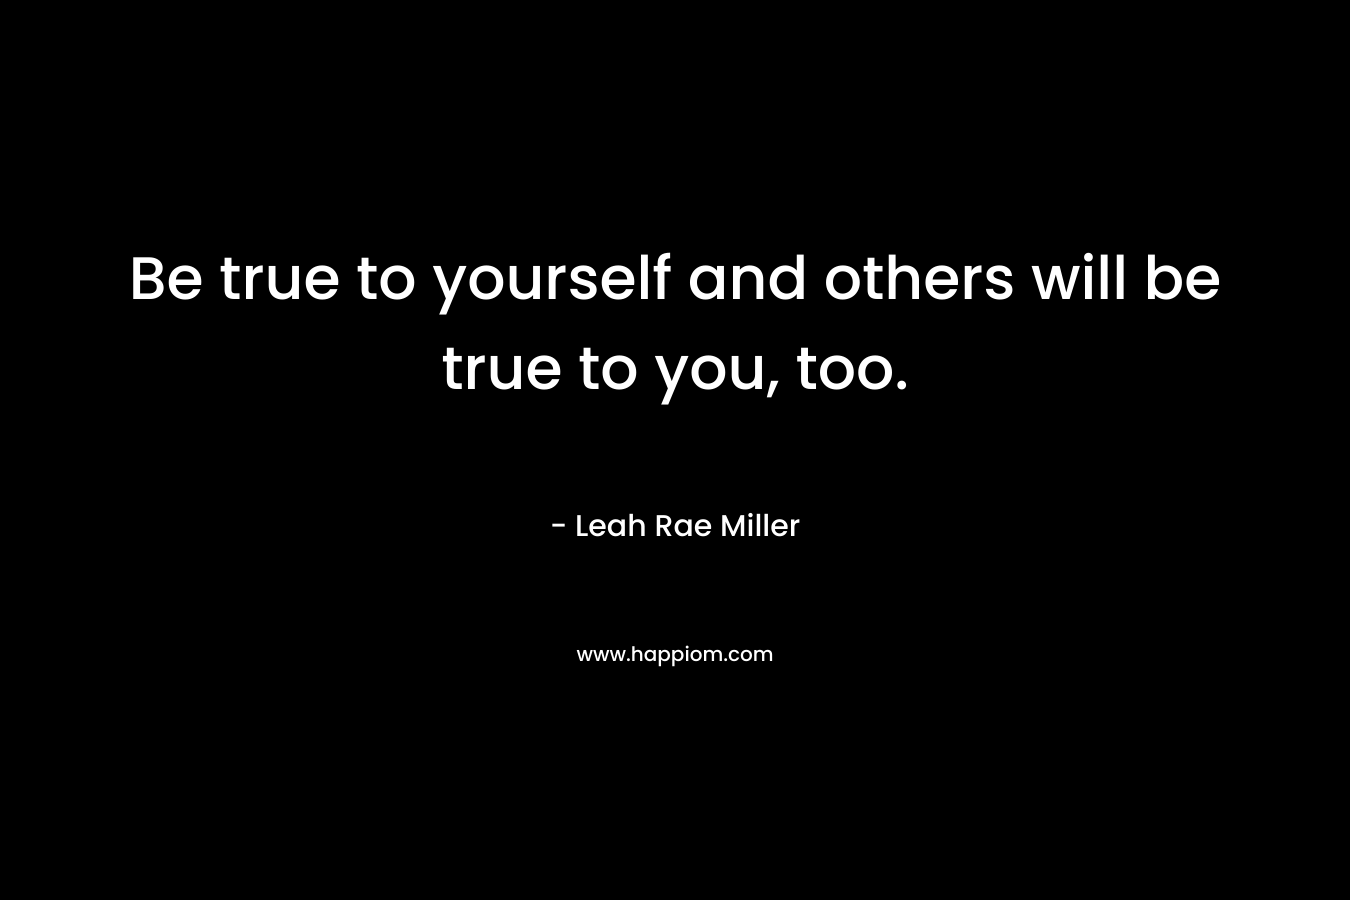 Be true to yourself and others will be true to you, too.